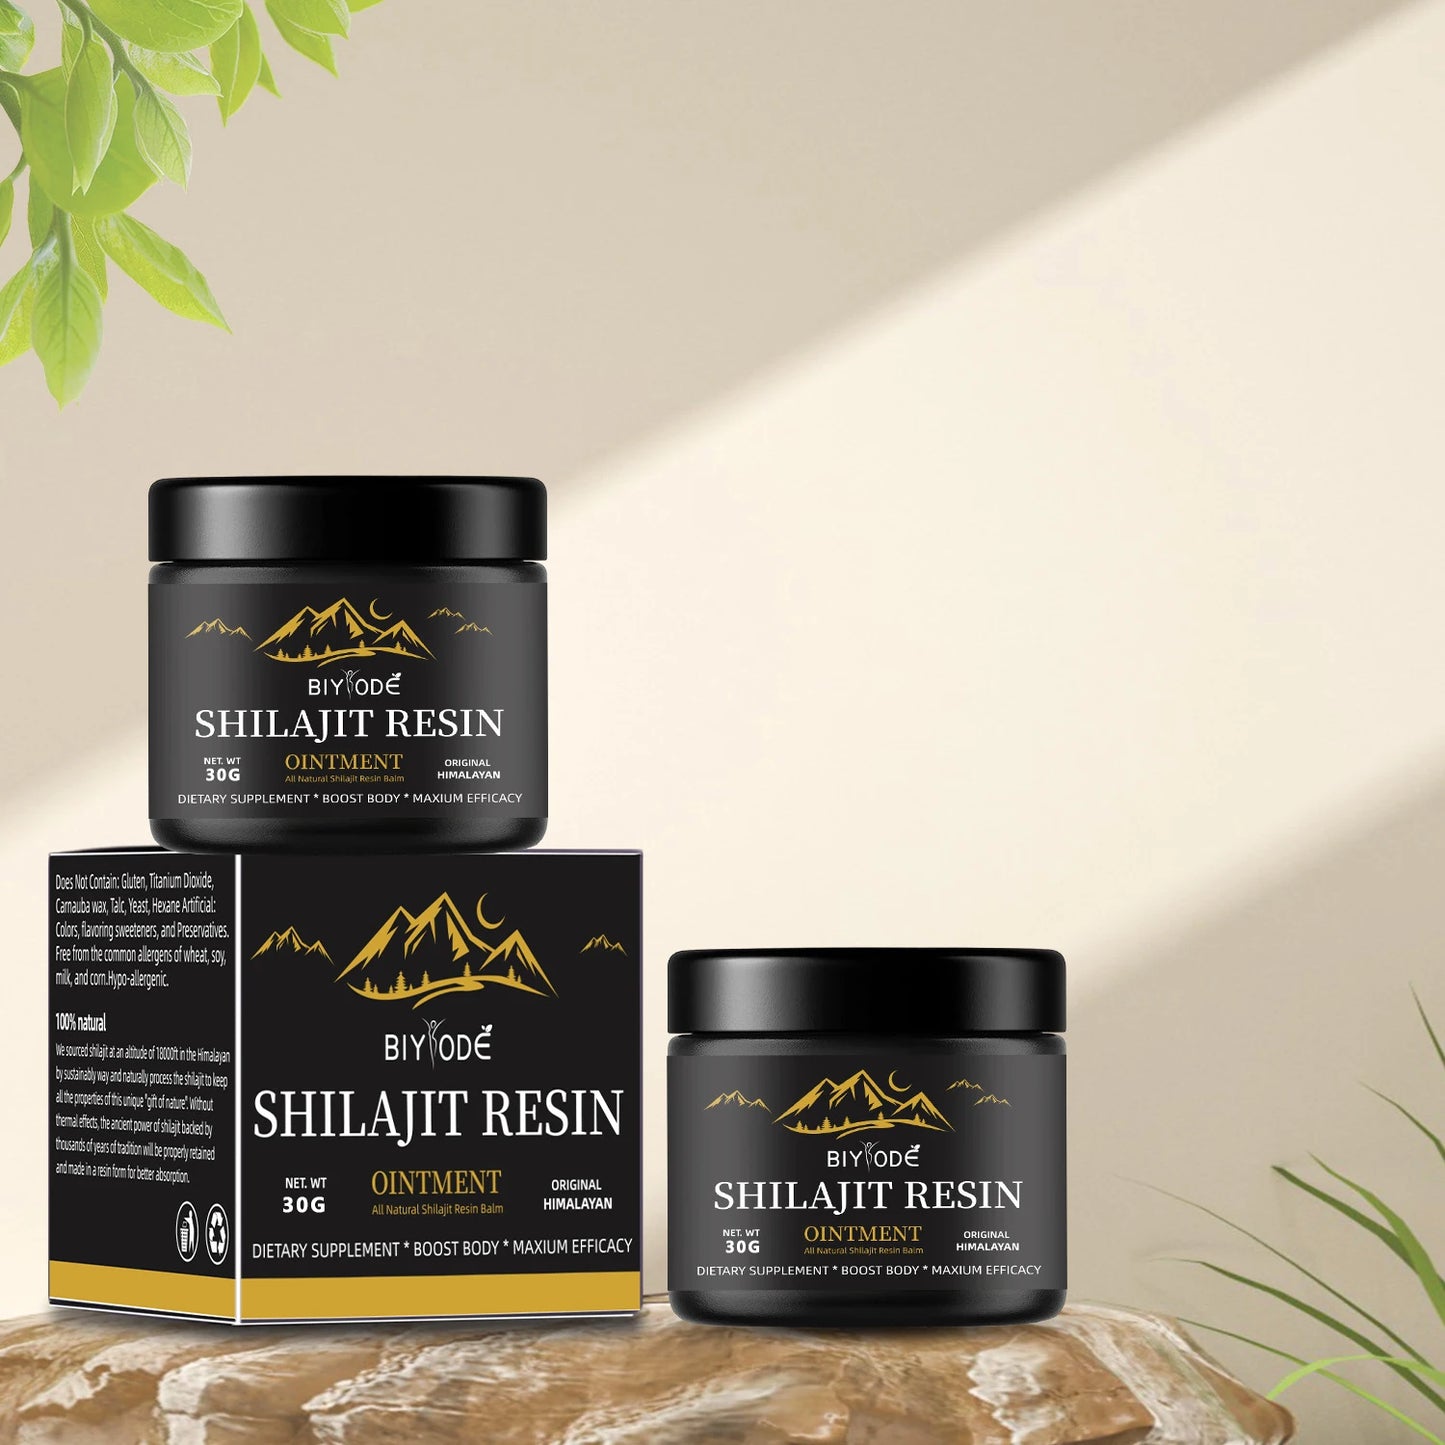 Shilajit Resin for Testosterone boost, Reduces fatigue and many other benefits